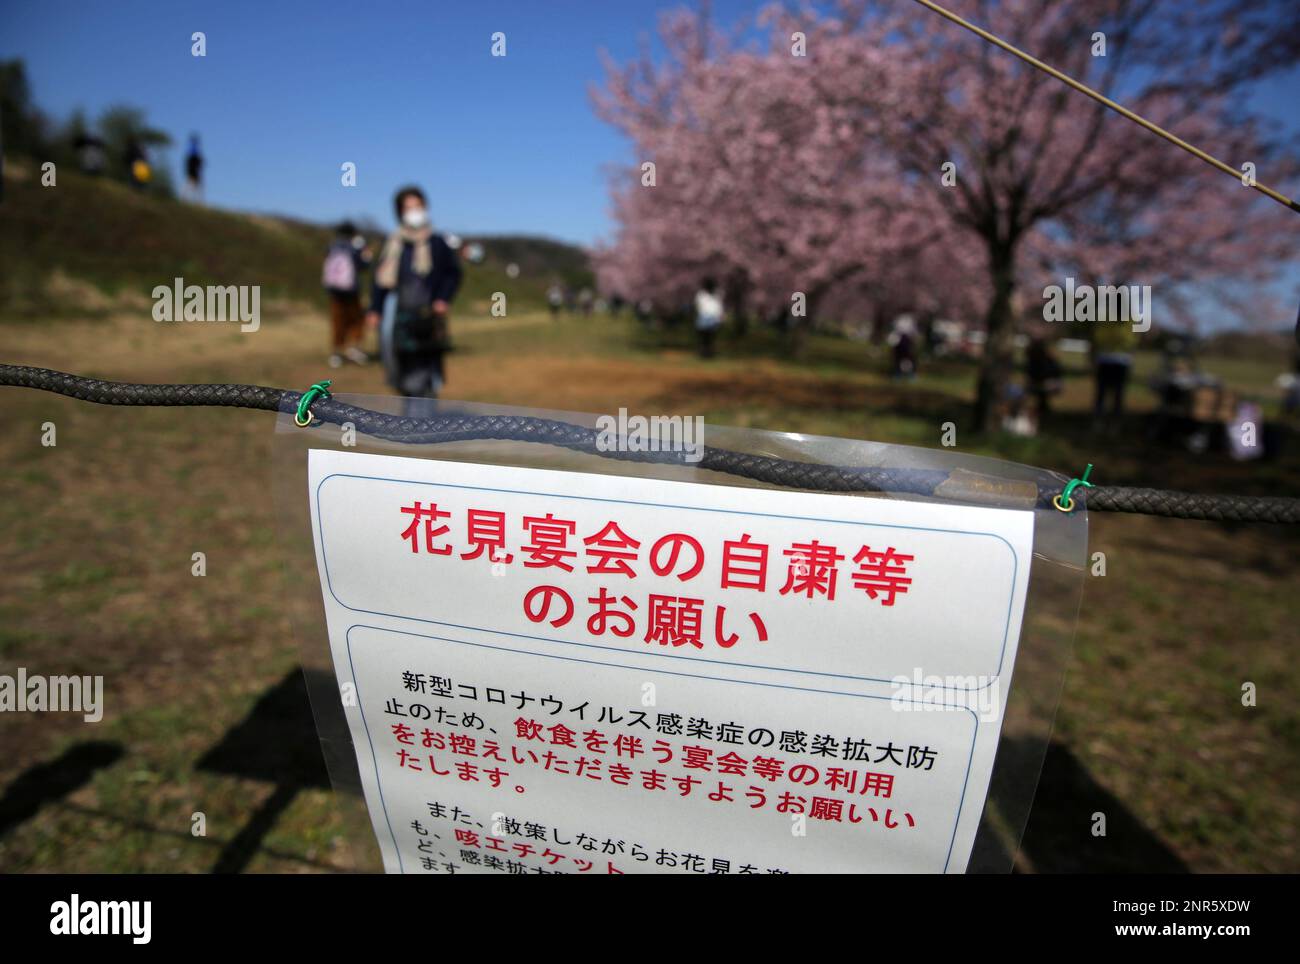 Information which request not to eat and drink under cherry blossoms in full bloom at Kitaasaba Sakura Zutsumi park in Sakado, Saitama Prefecture on March 12, 2020, amid an outbreak of the coronavirus CIVID-19 in Japan. It is Japanese traditional custom to gather under the trees and enjoy earing and drinking in cherry blossom, sakura, season. ( The Yomiuri Shimbun via AP Images ) Stock Photo